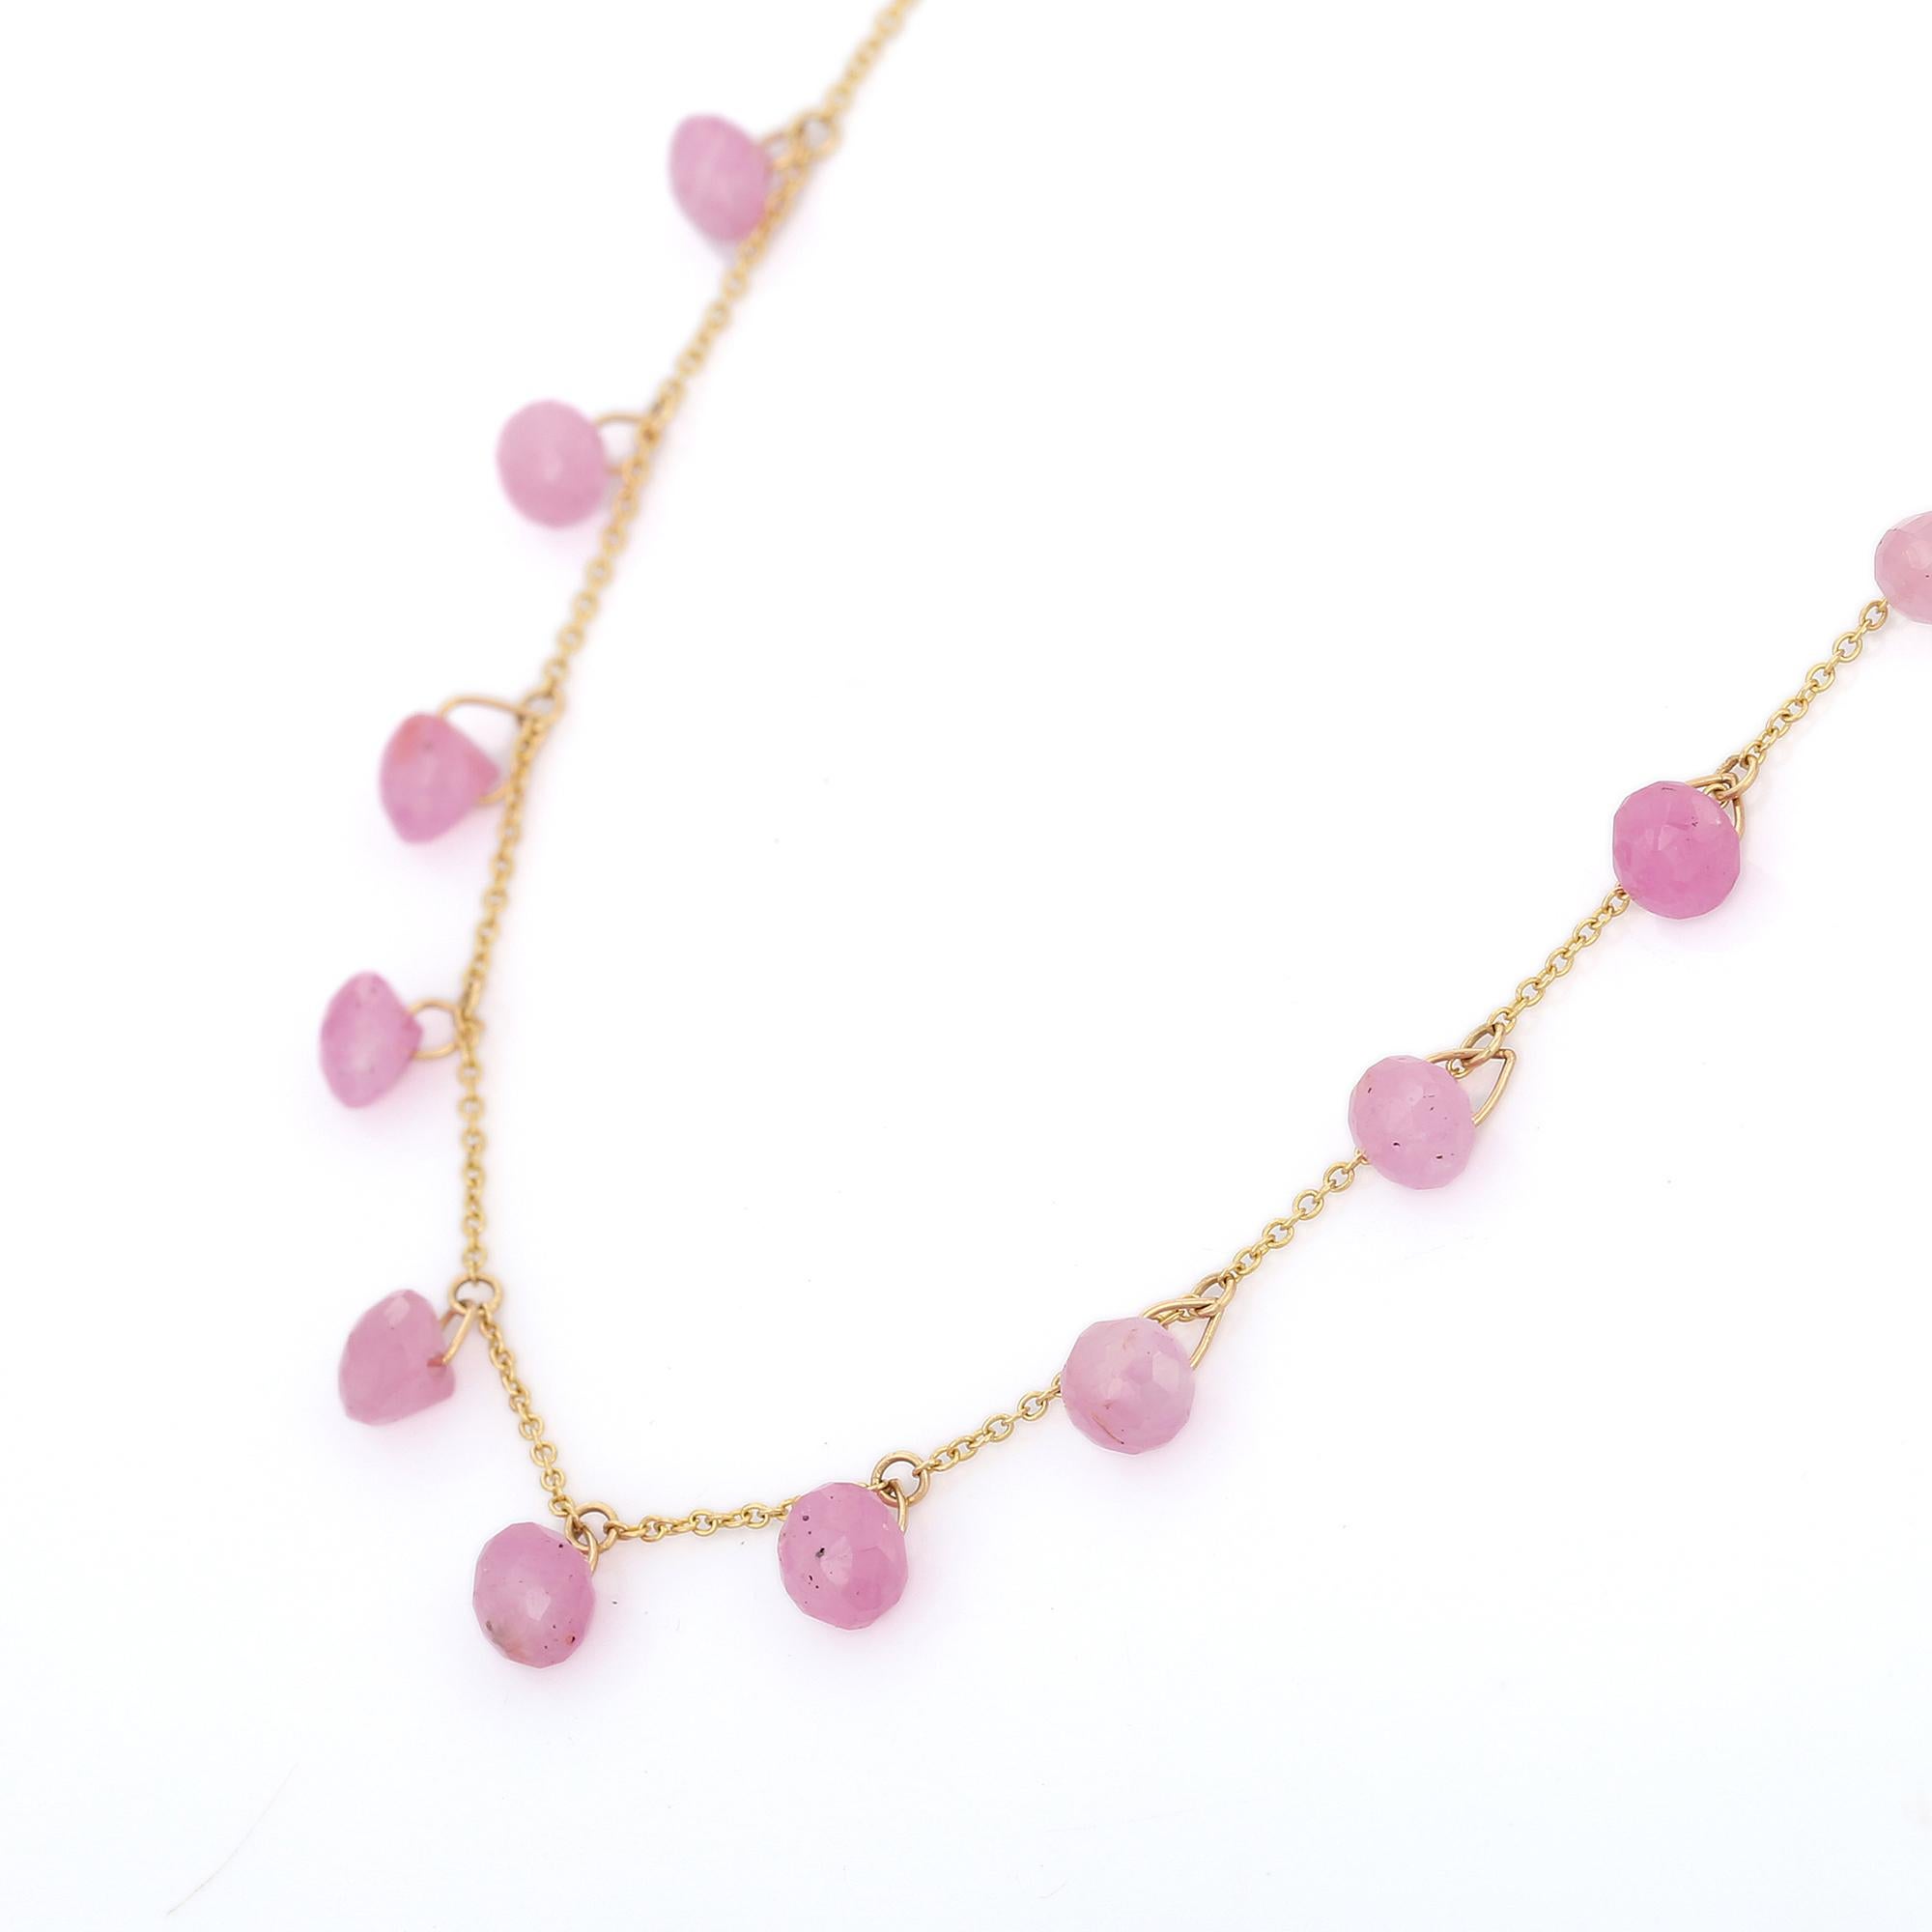 Modern 11.5 Carat Pink Sapphire Drop Necklace in 18K Yellow Gold